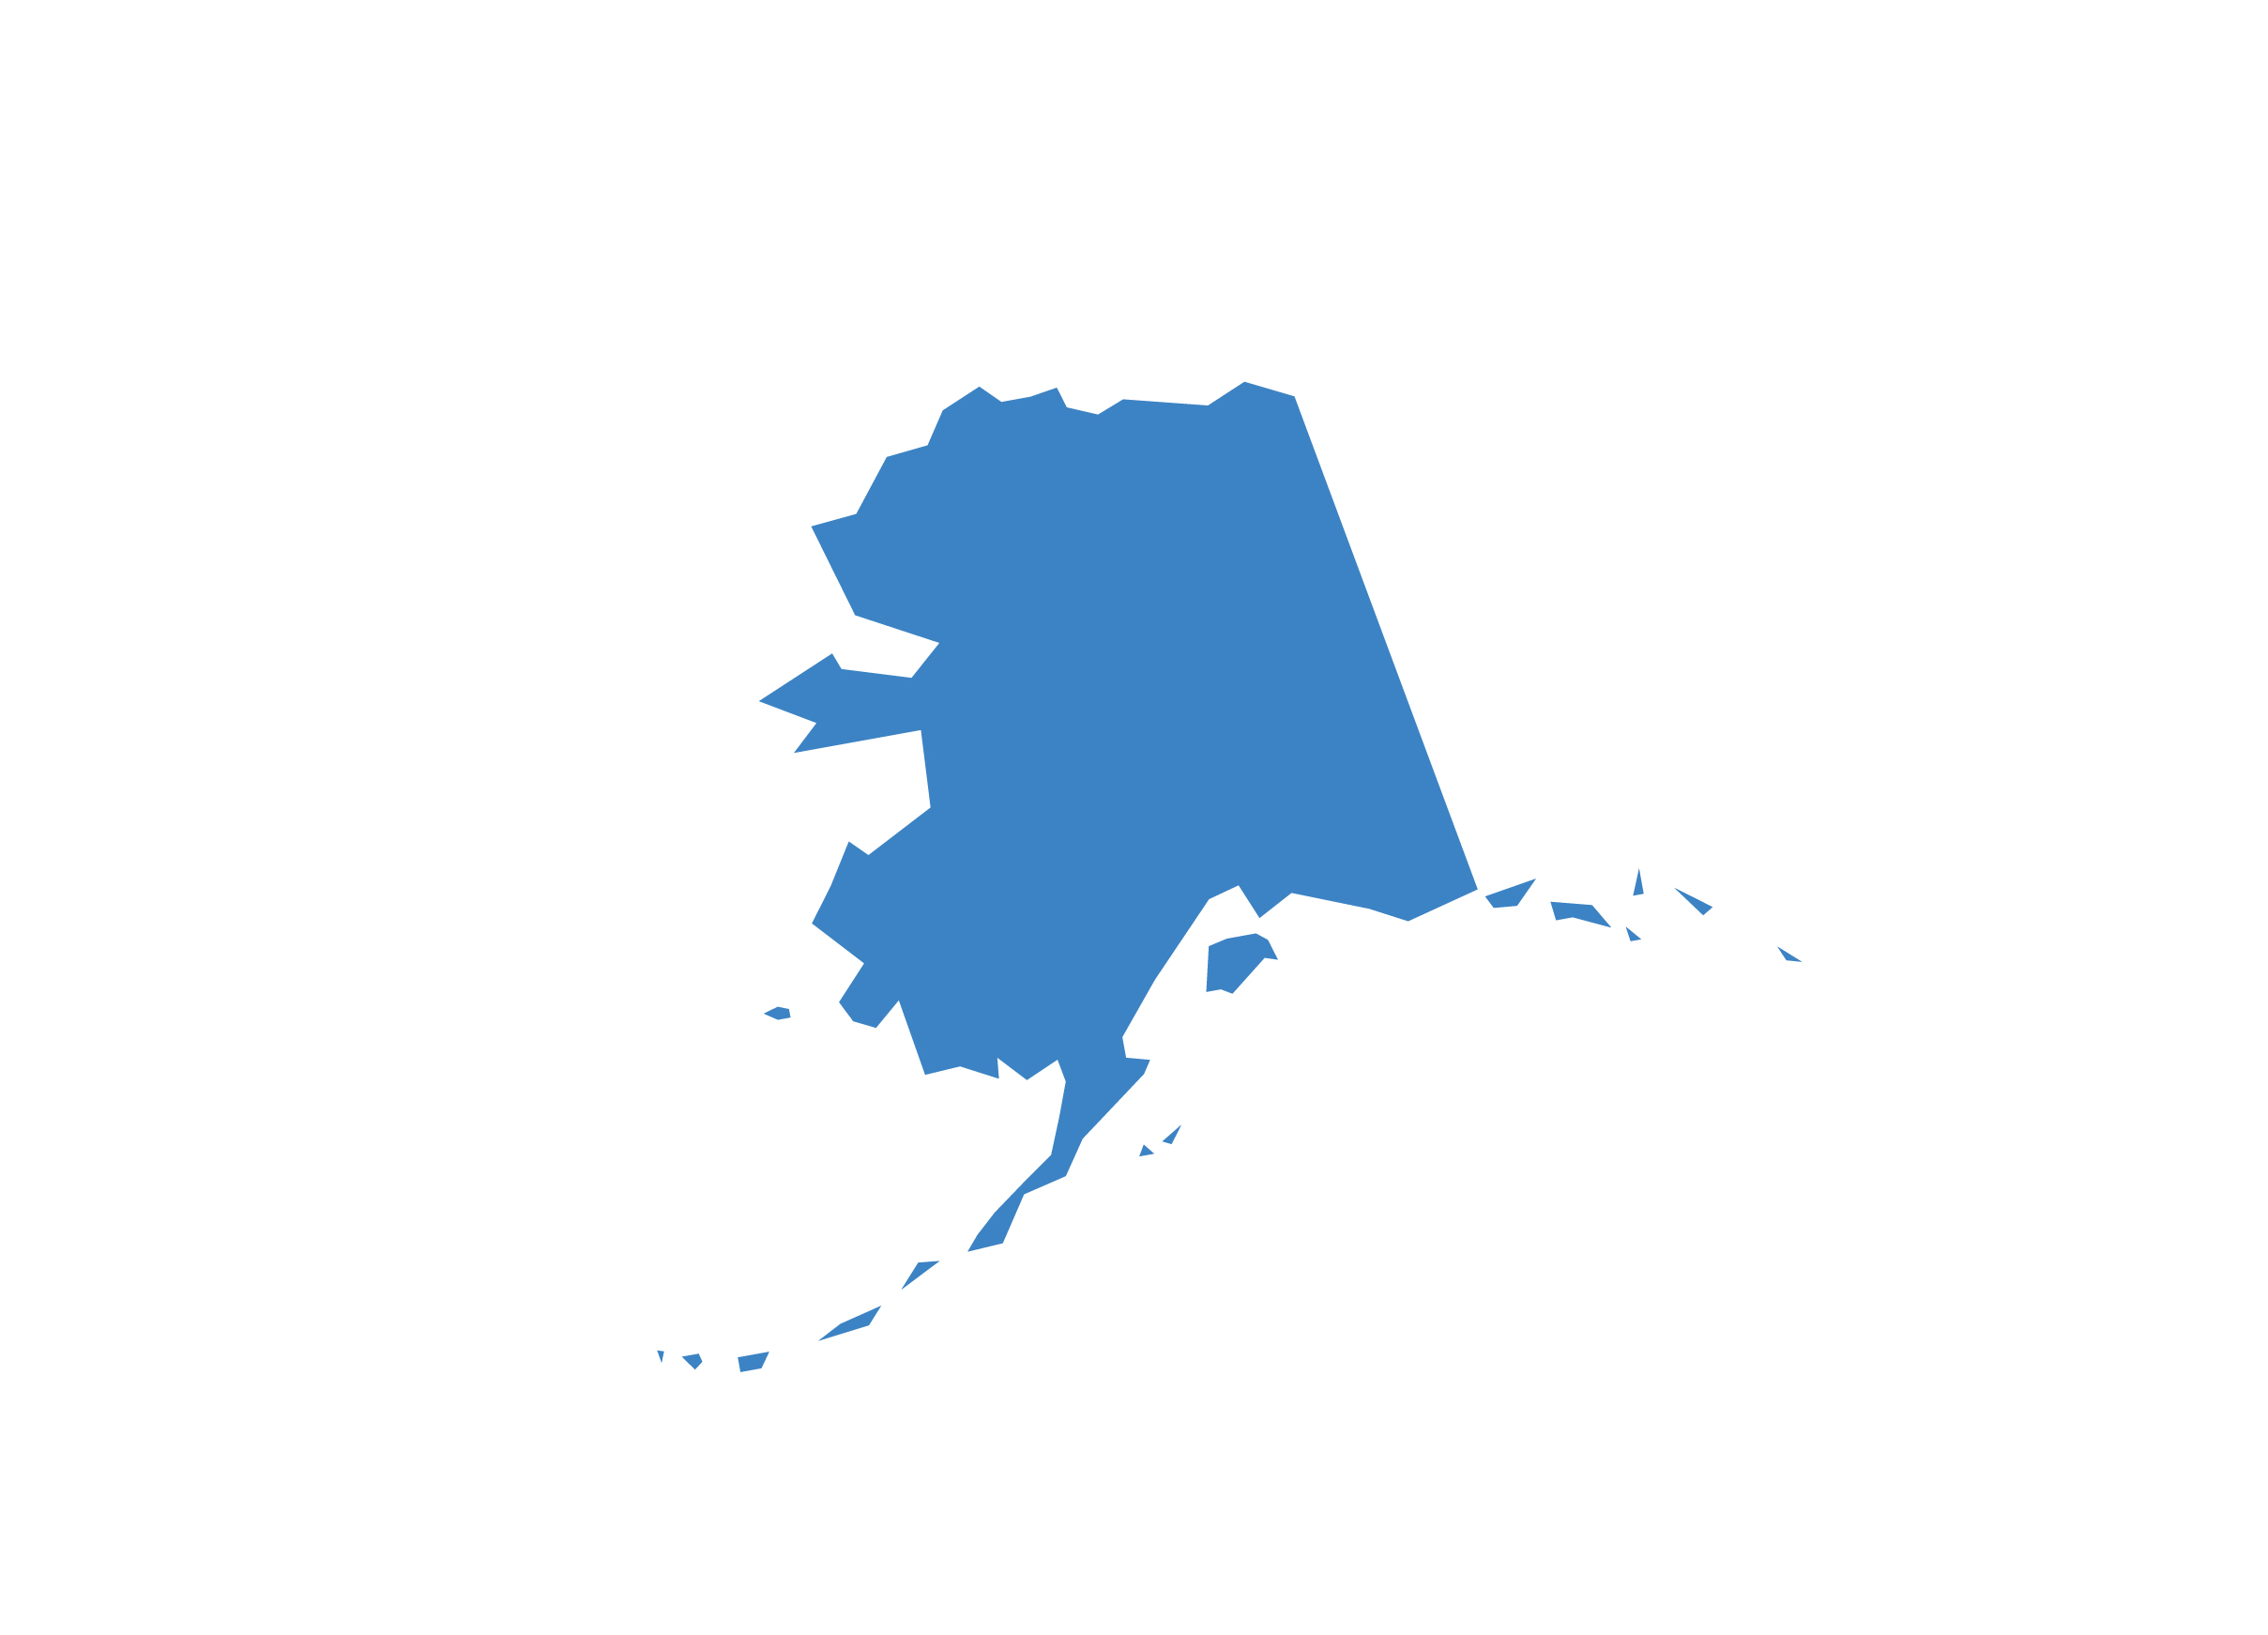 The shape of the state of Alaska